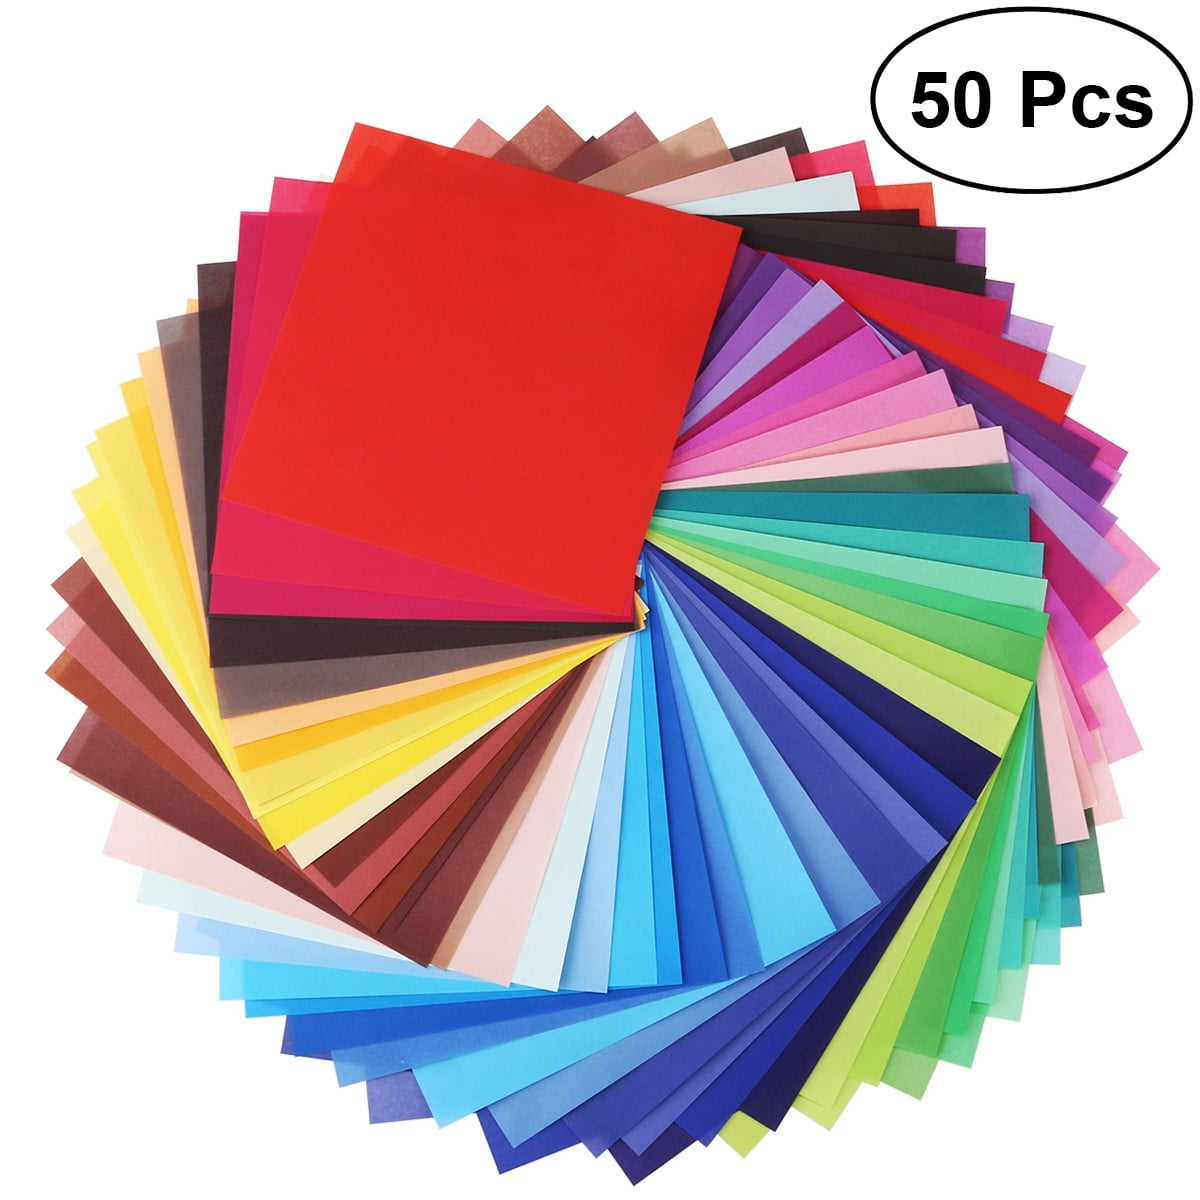 50 Sheets Vivid Colors Sided Origami Paper Square Sheet for Arts Crafts Projects